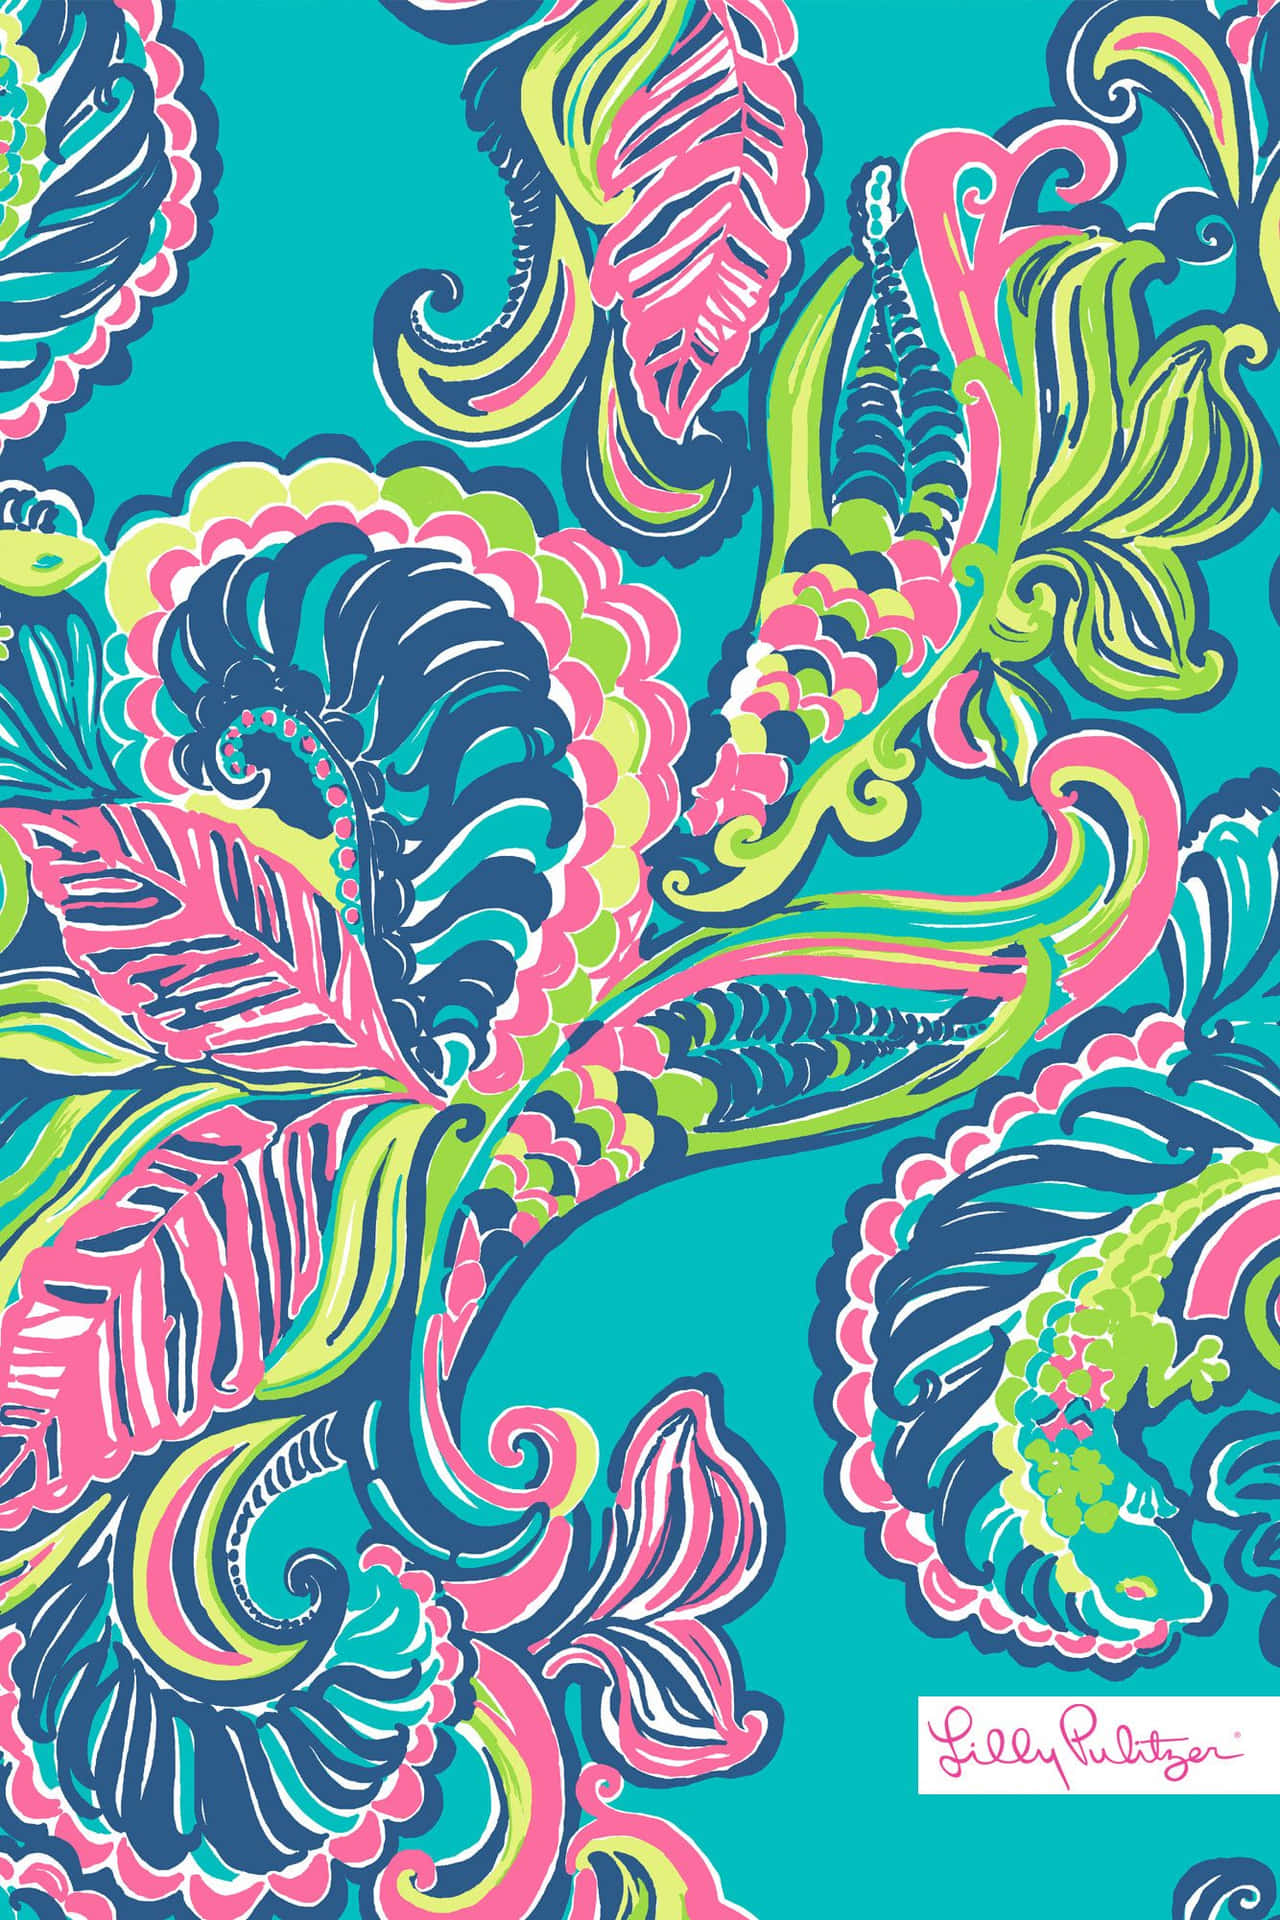 Shop the Latest Collection of Preppy and Colorful Women's Clothing at Lilly Pulitzer